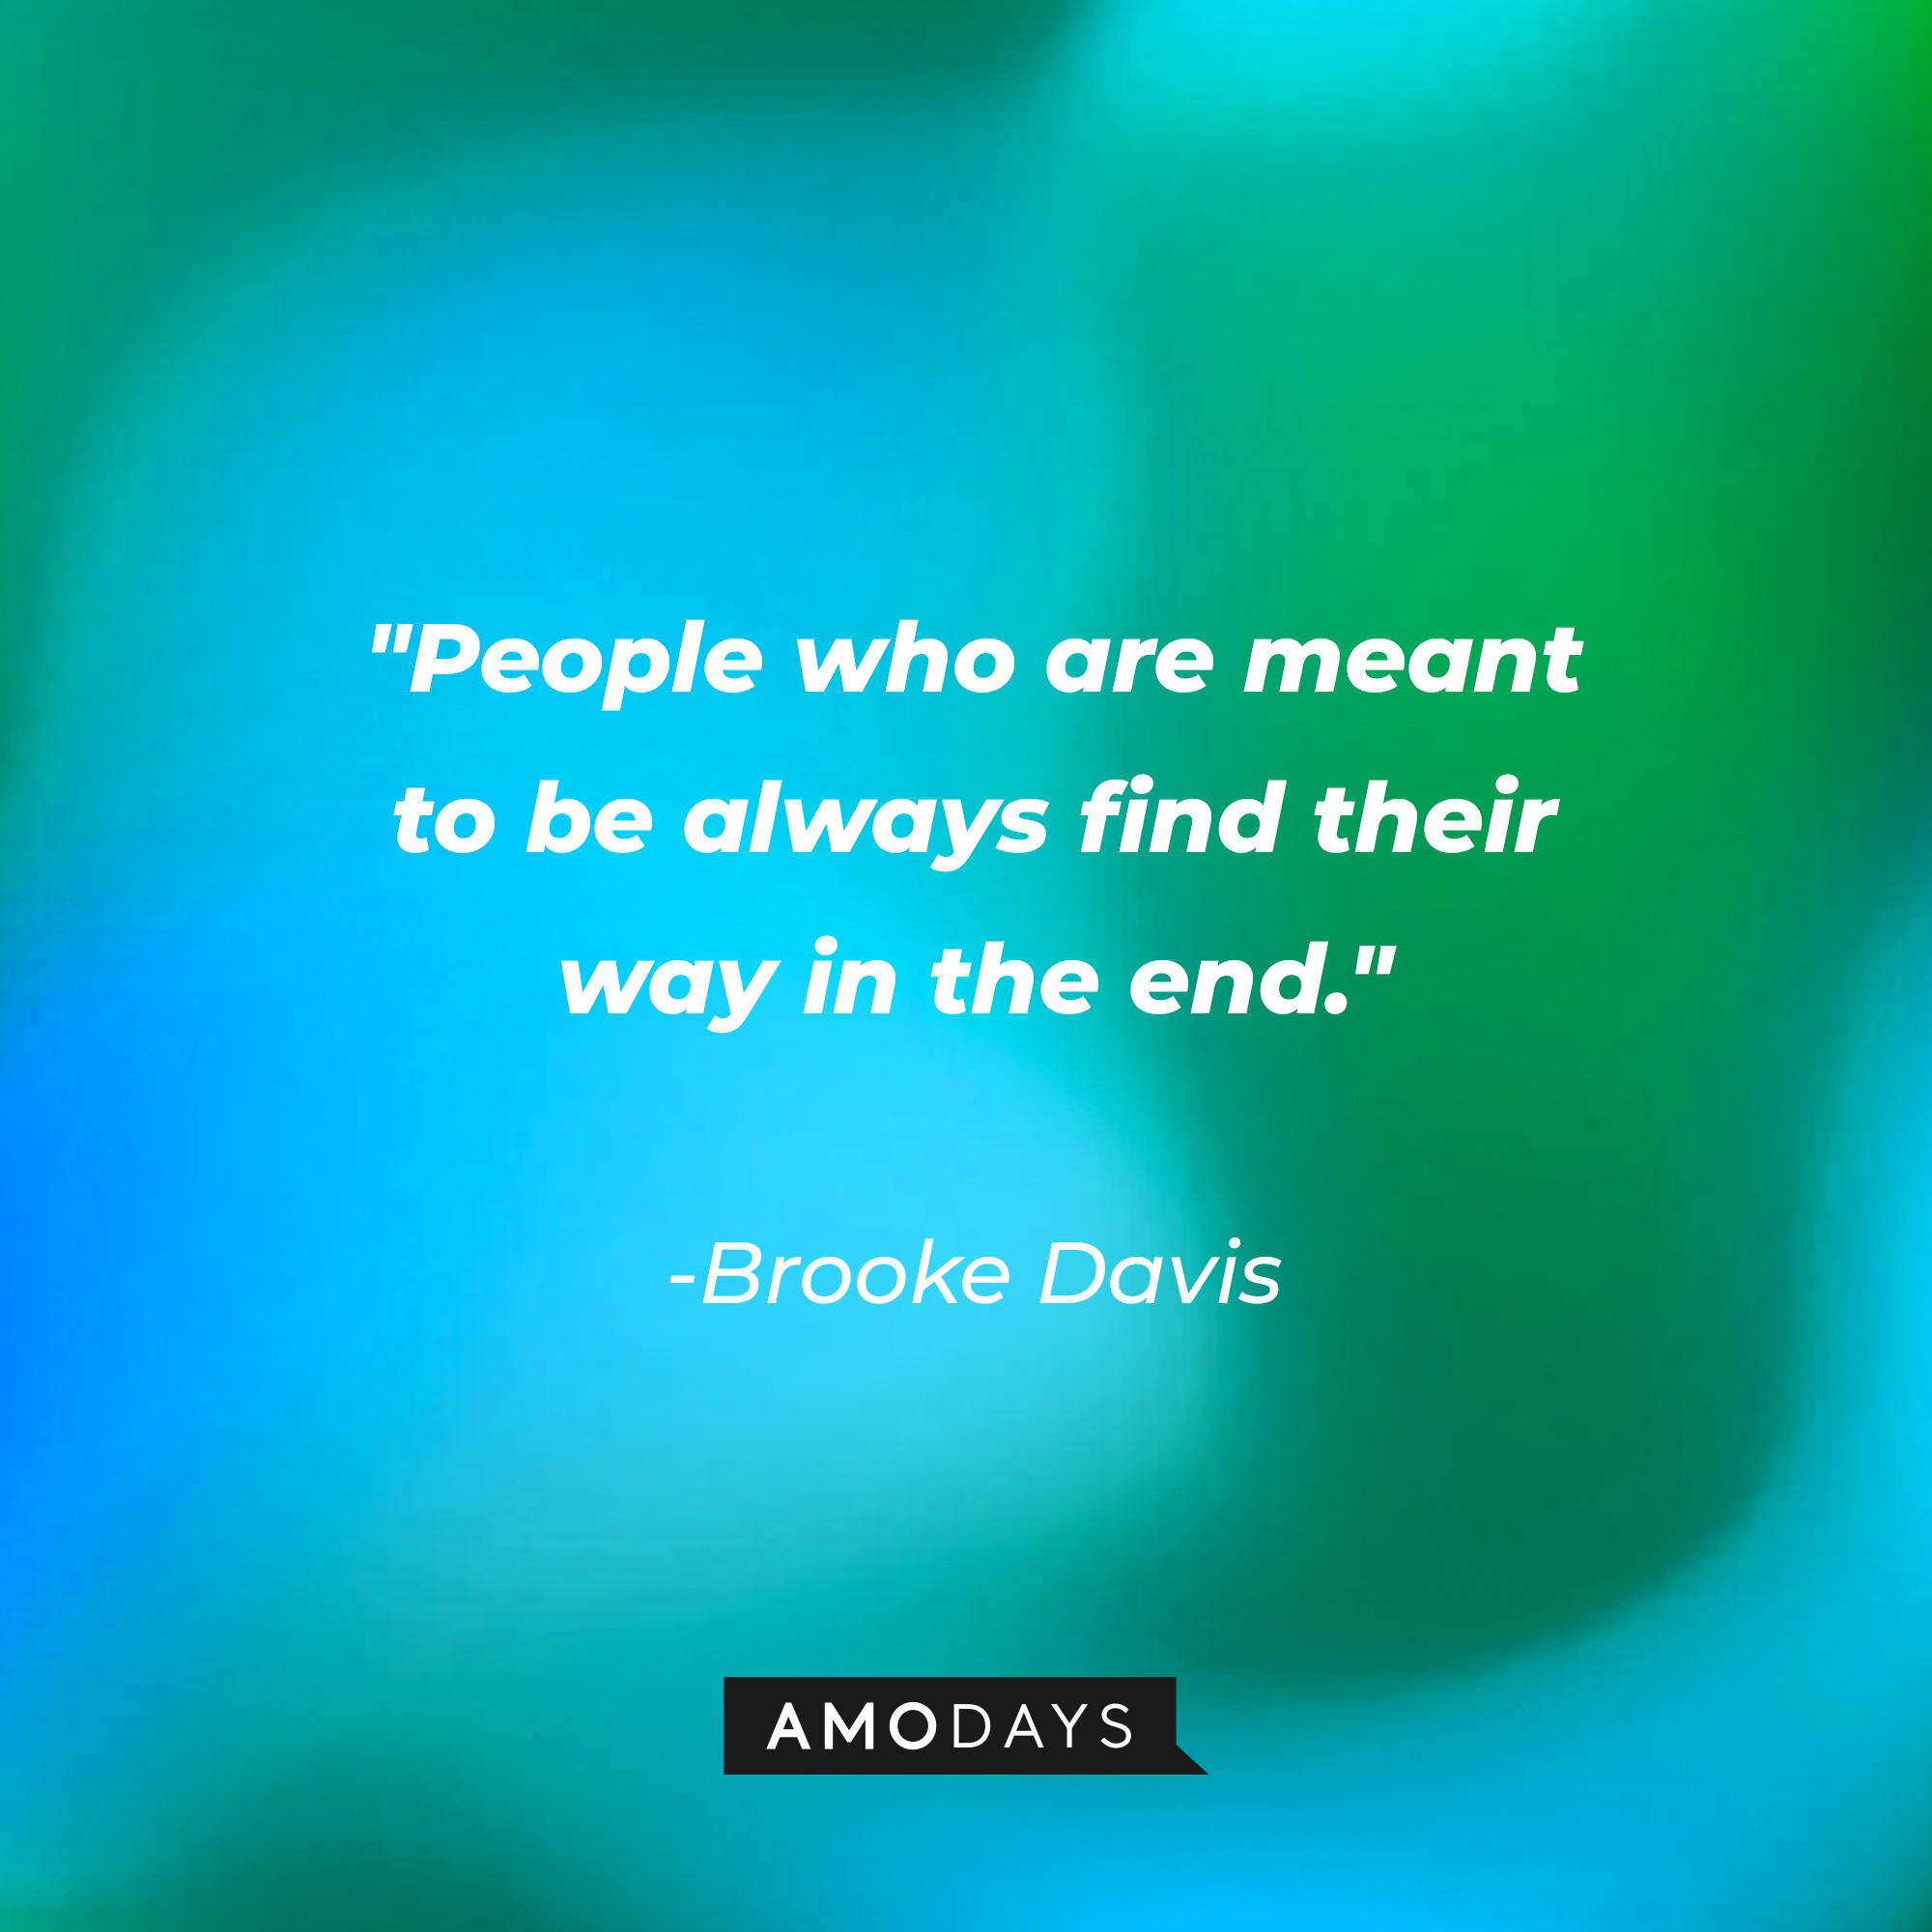 Brooke Davis' quote: "People who are meant to be always find their way in the end." | Source: AmoDays